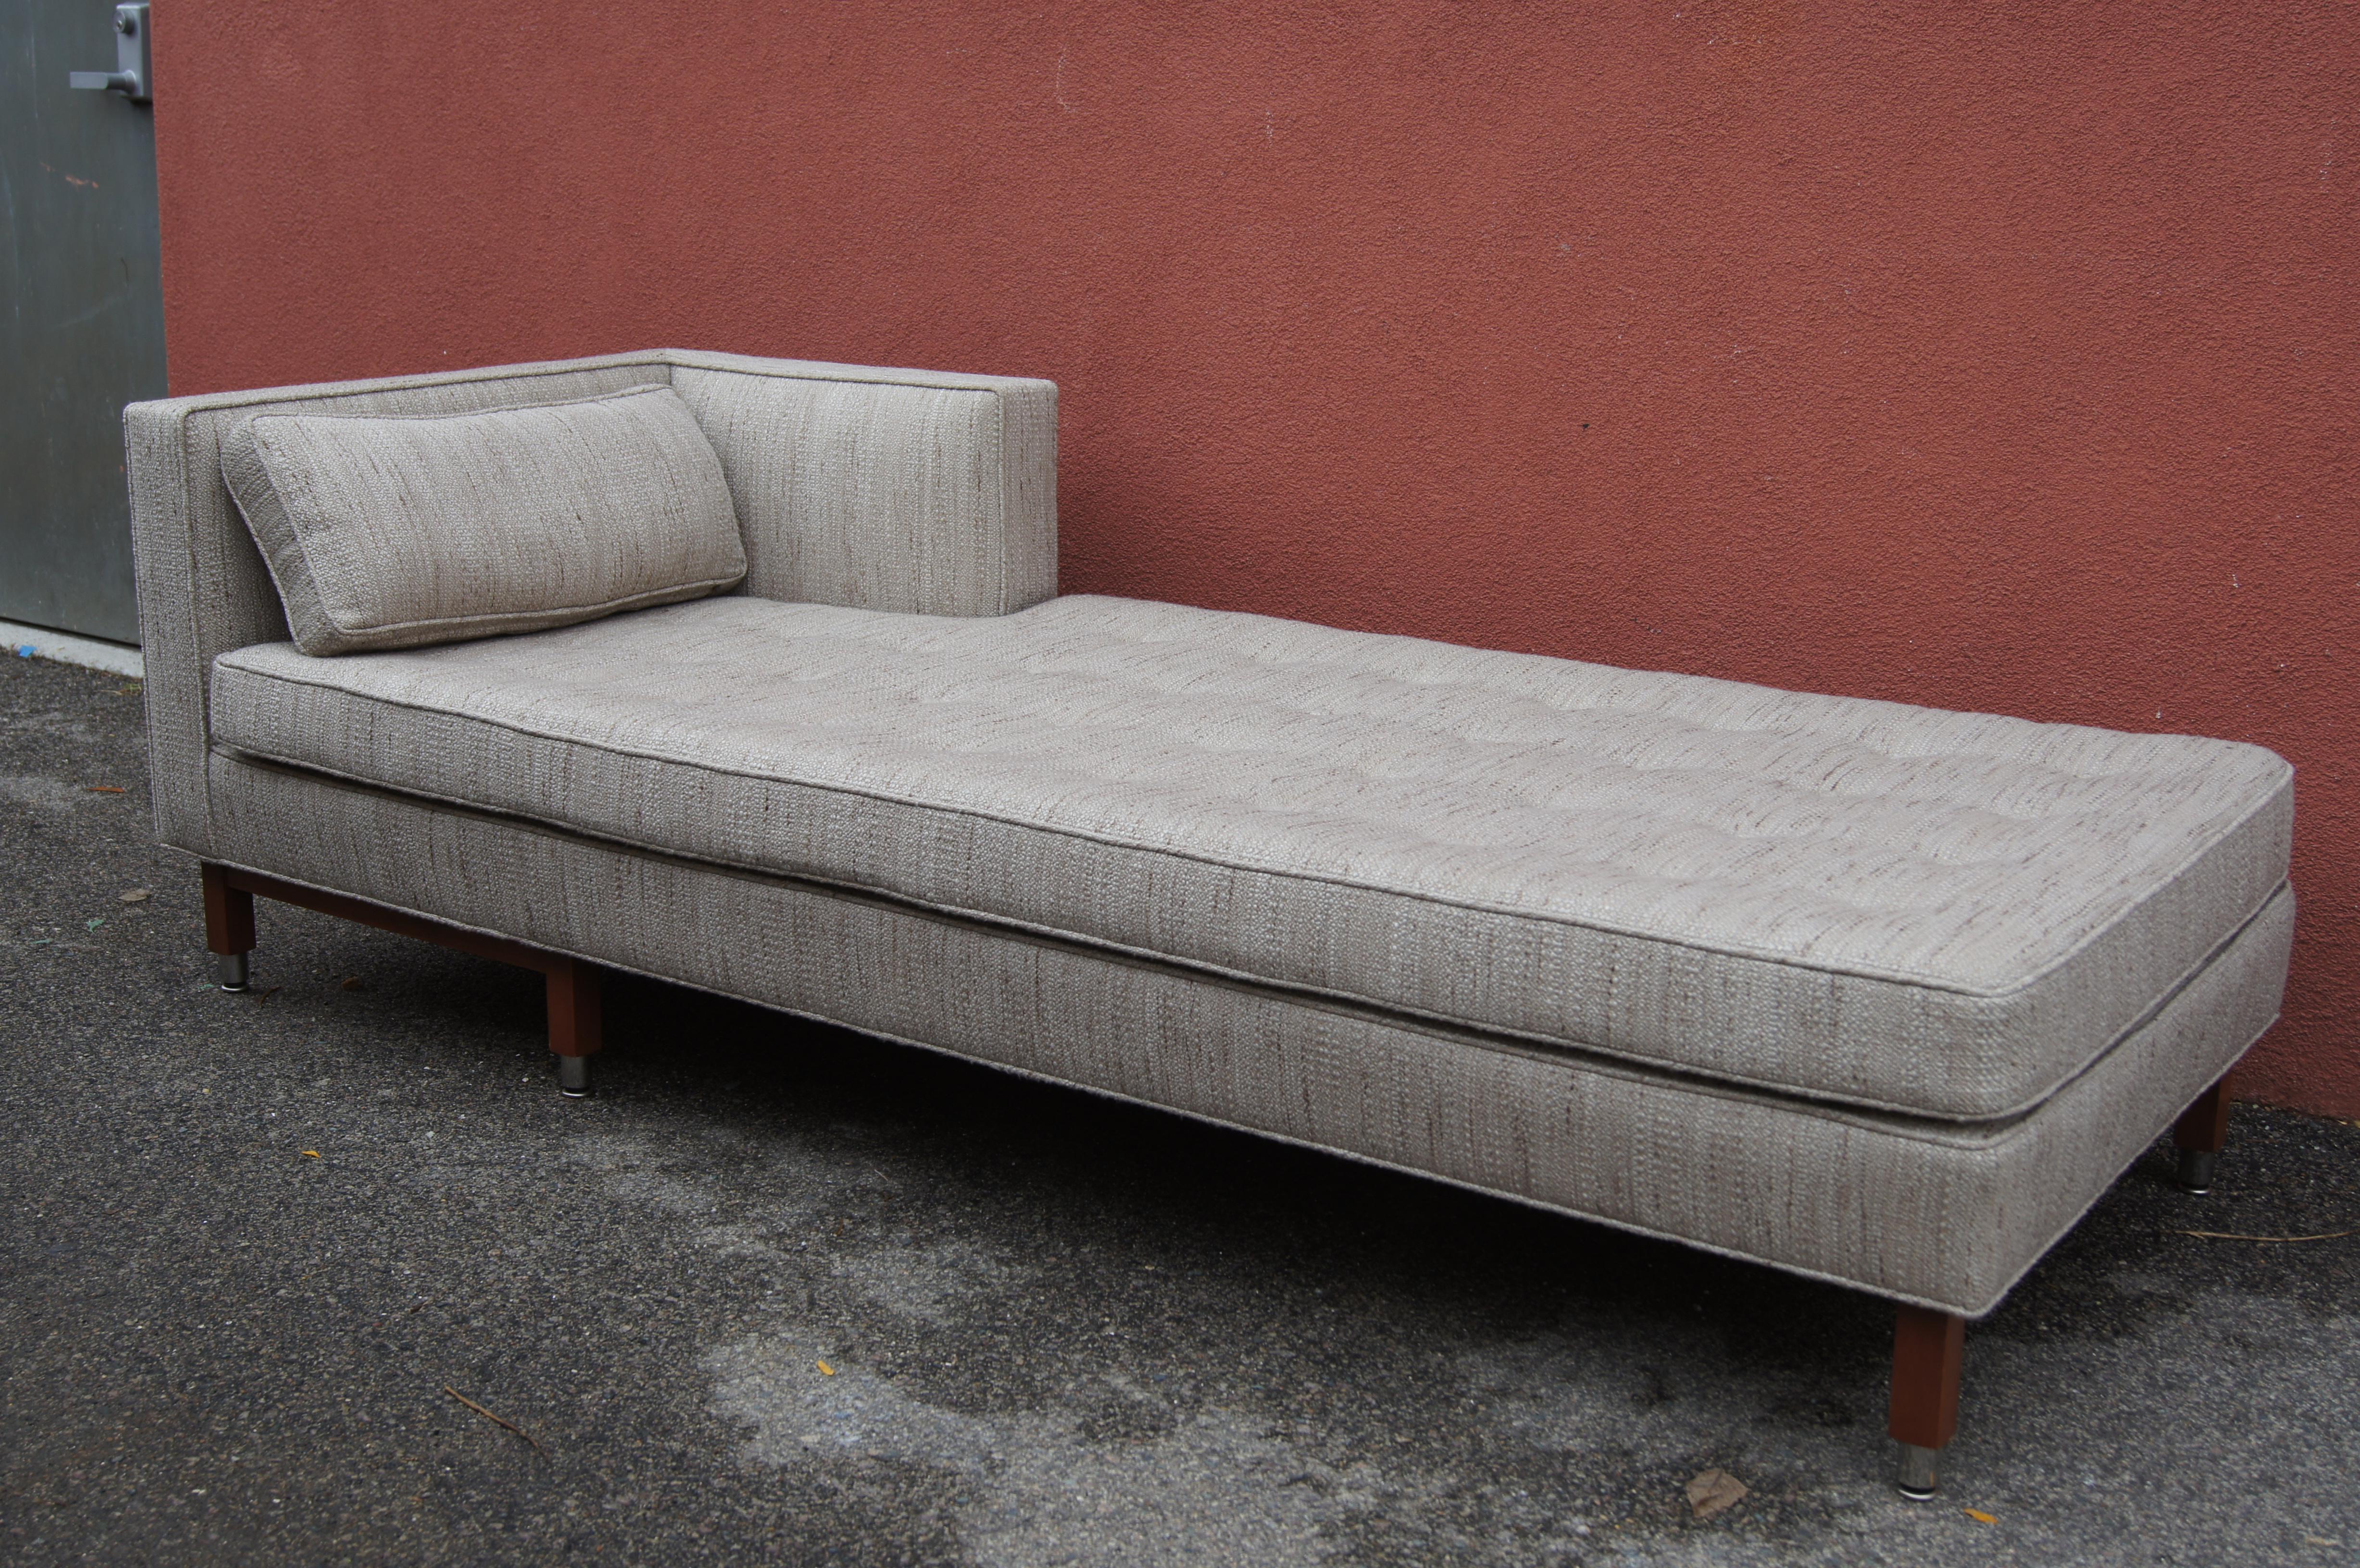 Contemporary Daybed in the Style of Mid-Century Edward Wormley for Dunbar For Sale